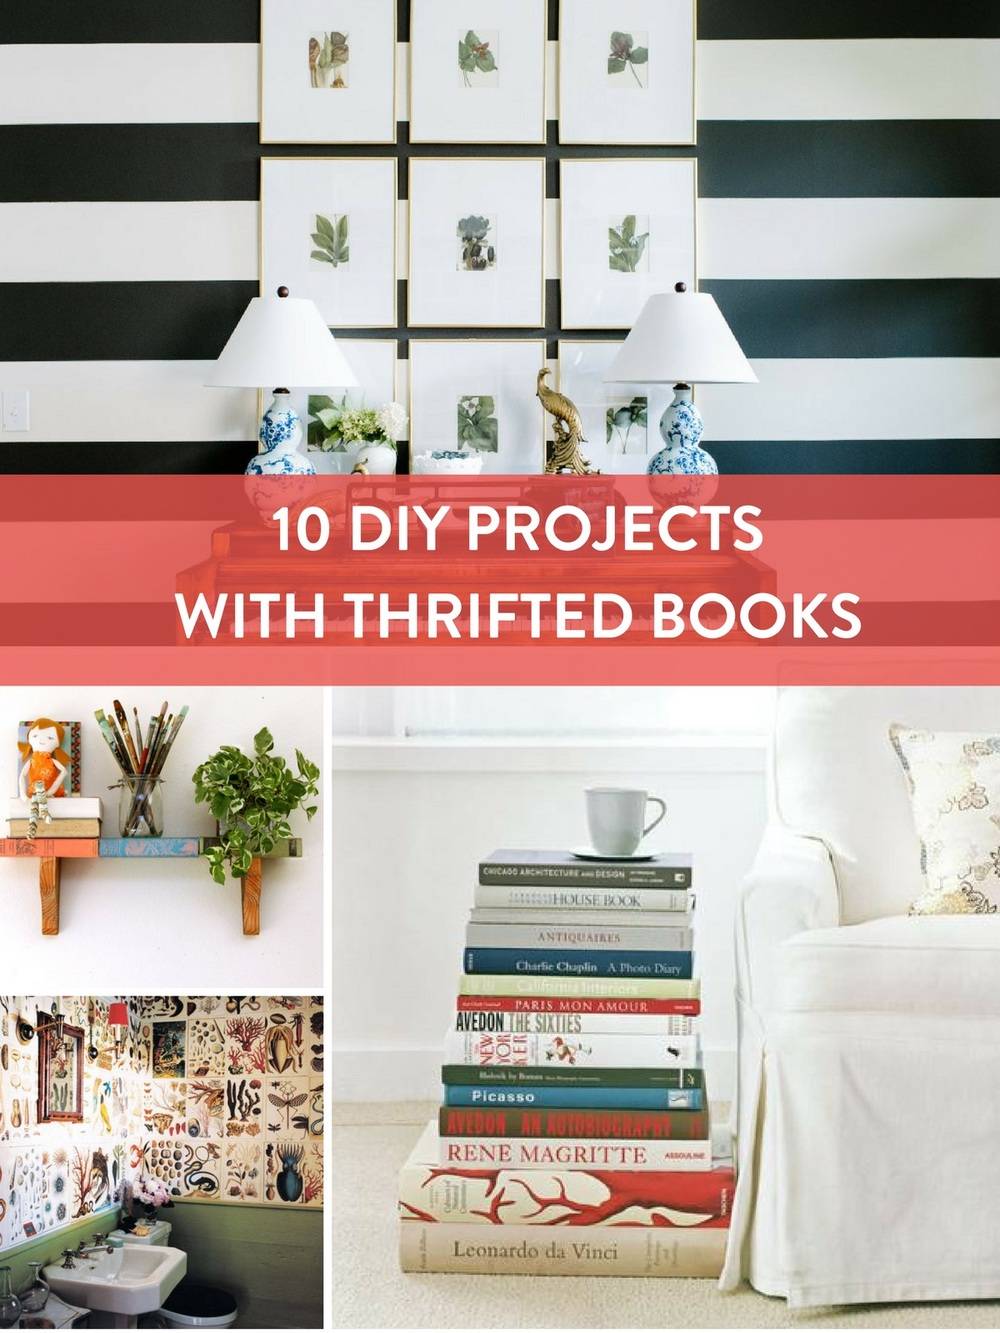 A book with 10 DIY projects on the cover